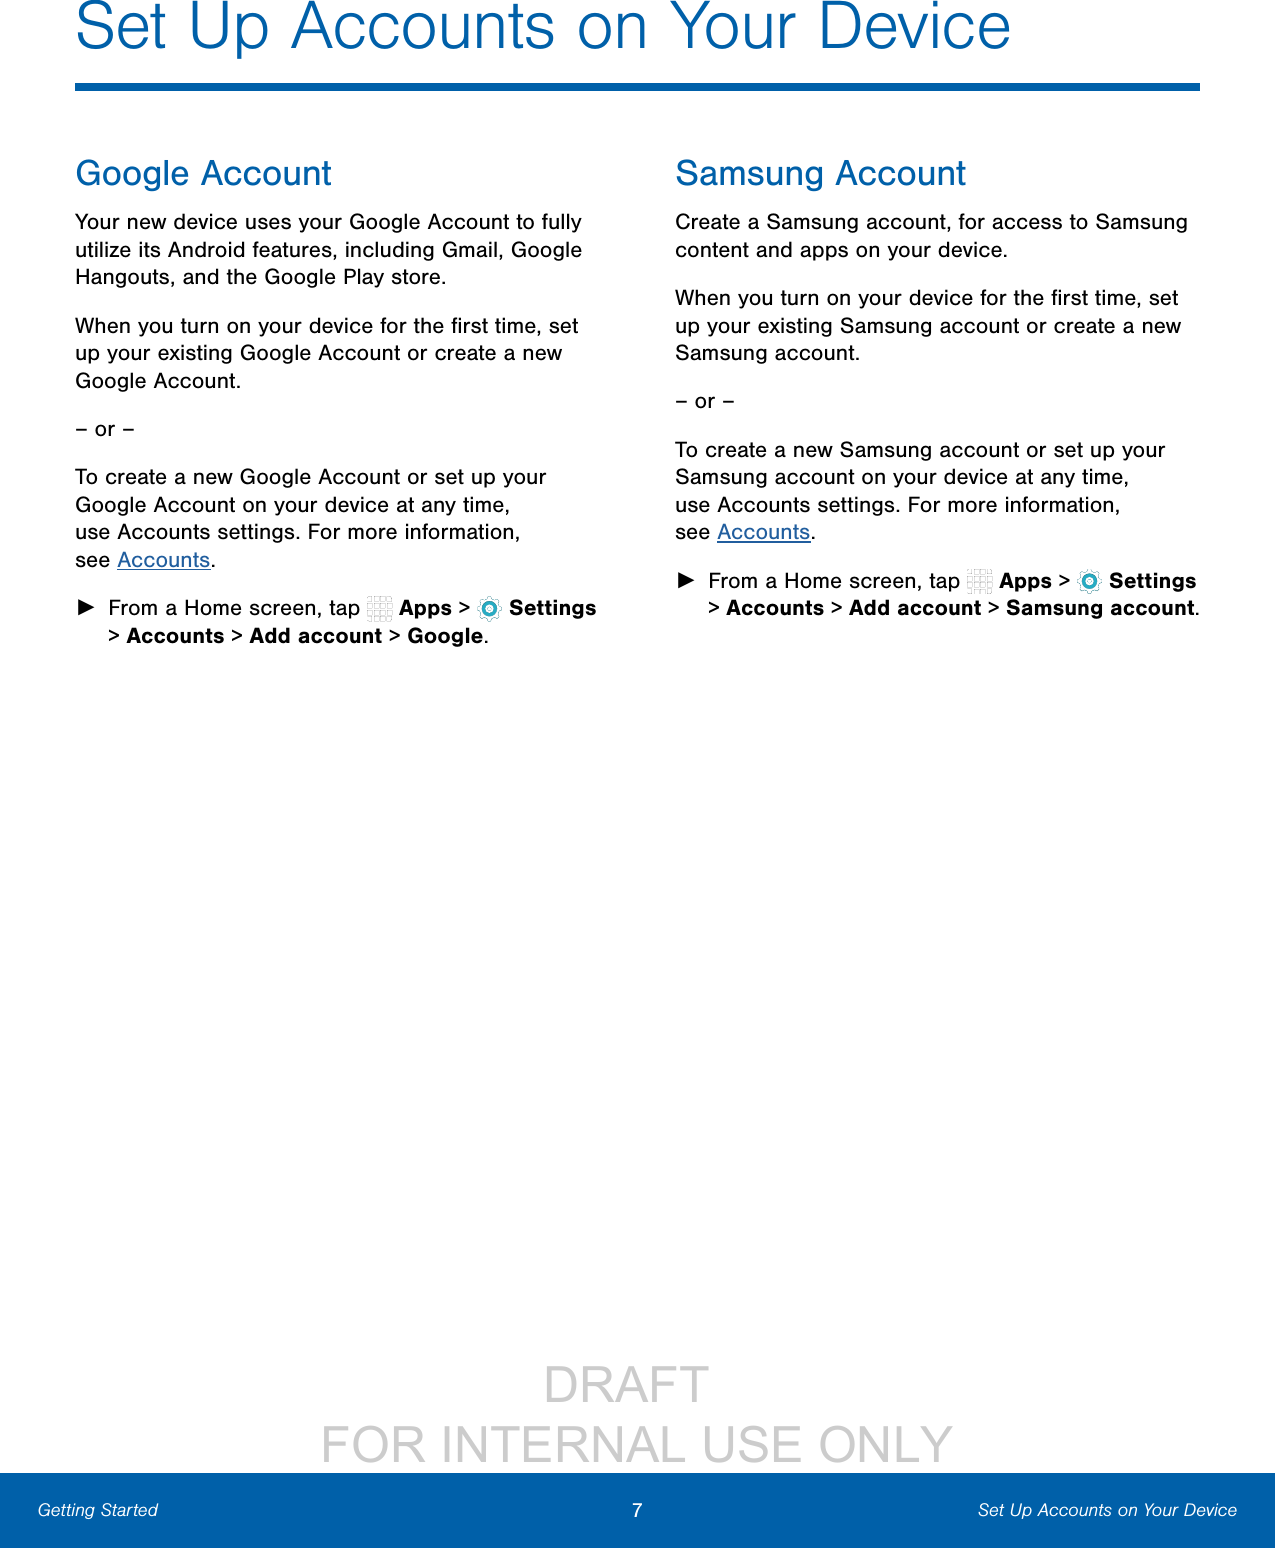                 DRAFT FOR INTERNAL USE ONLY7Set Up Accounts on Your DeviceGetting StartedGoogle AccountYour new device uses your Google Account to fully utilize its Android features, including Gmail, Google Hangouts, and the Google Play store.When you turn on your device for the ﬁrst time, set up your existing Google Account or create a new Google Account.– or –To create a new Google Account or set up your Google Account on your device at any time, use Accounts settings. Formore information, seeAccounts. ►From a Home screen, tap   Apps &gt;  Settings &gt; Accounts &gt; Add account &gt; Google.Samsung AccountCreate a Samsung account, for access to Samsung content and apps on your device. When you turn on your device for the ﬁrst time, set up your existing Samsung account or create a new Samsung account.– or –To create a new Samsung account or set up your Samsung account on your device at any time, use Accounts settings. Formore information, seeAccounts. ►From a Home screen, tap   Apps &gt;  Settings &gt; Accounts &gt; Add account &gt; Samsungaccount.Set Up Accounts on Your Device